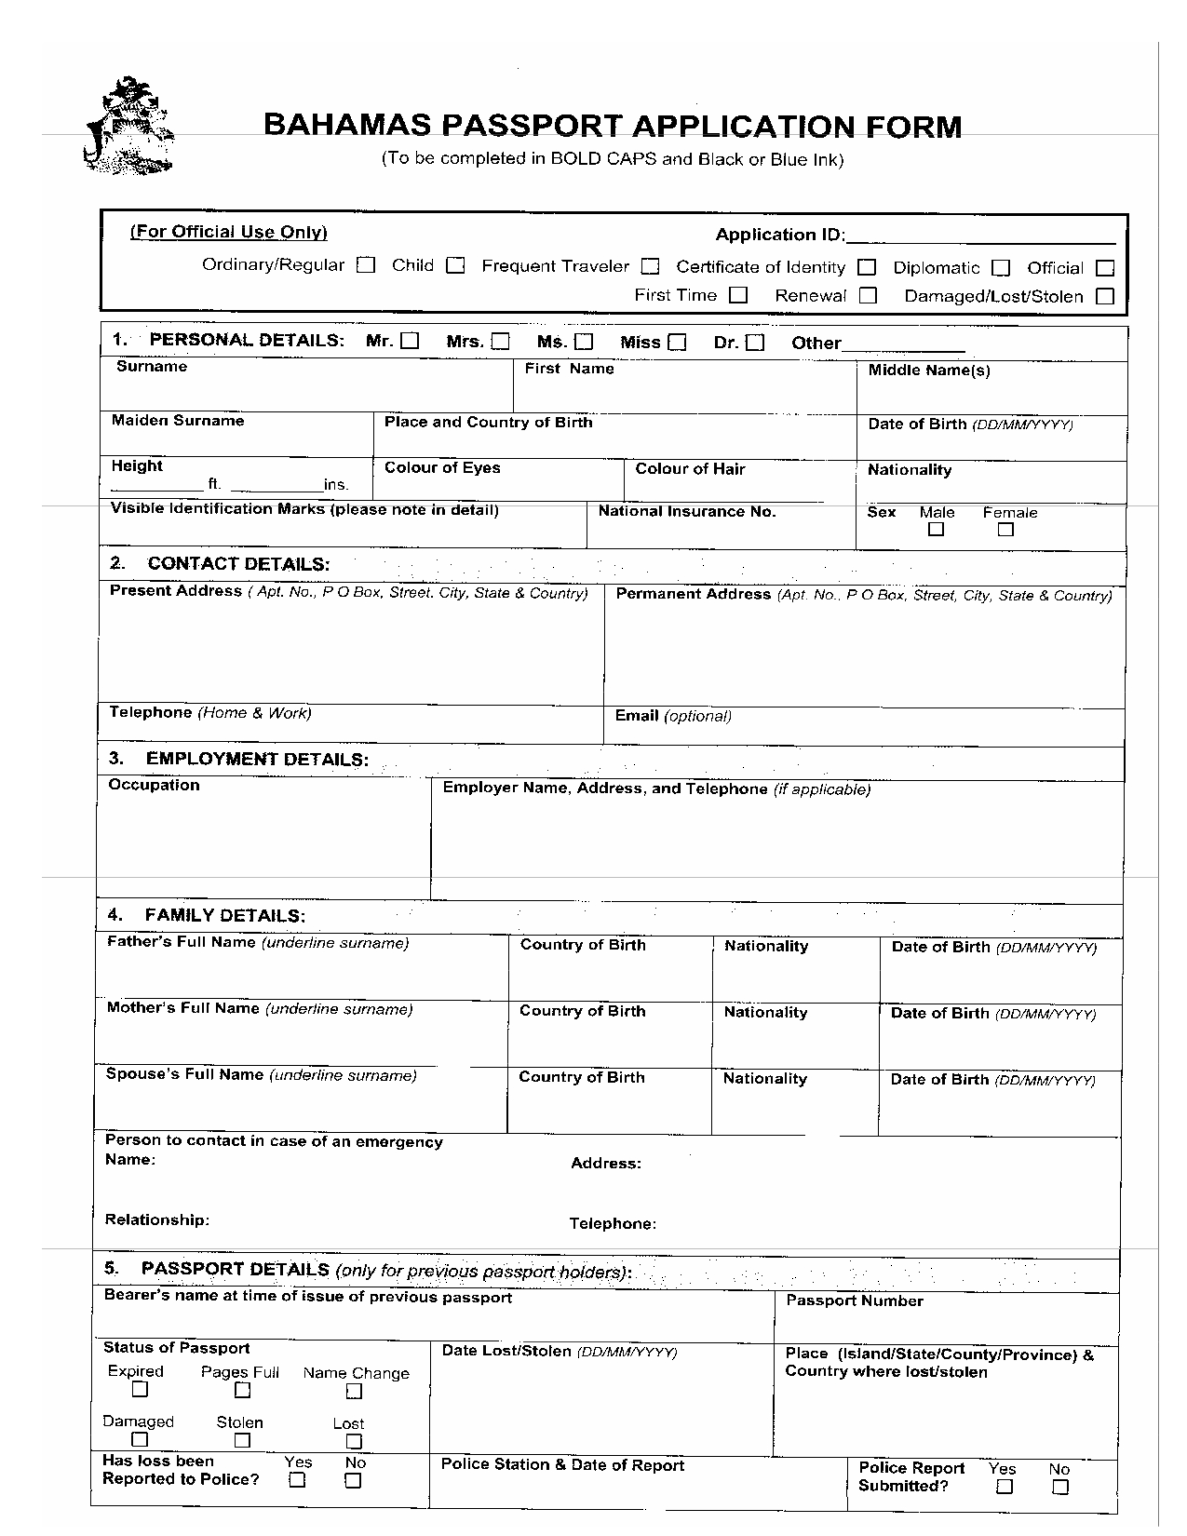 Birth Certificate Template For Microsoft Word